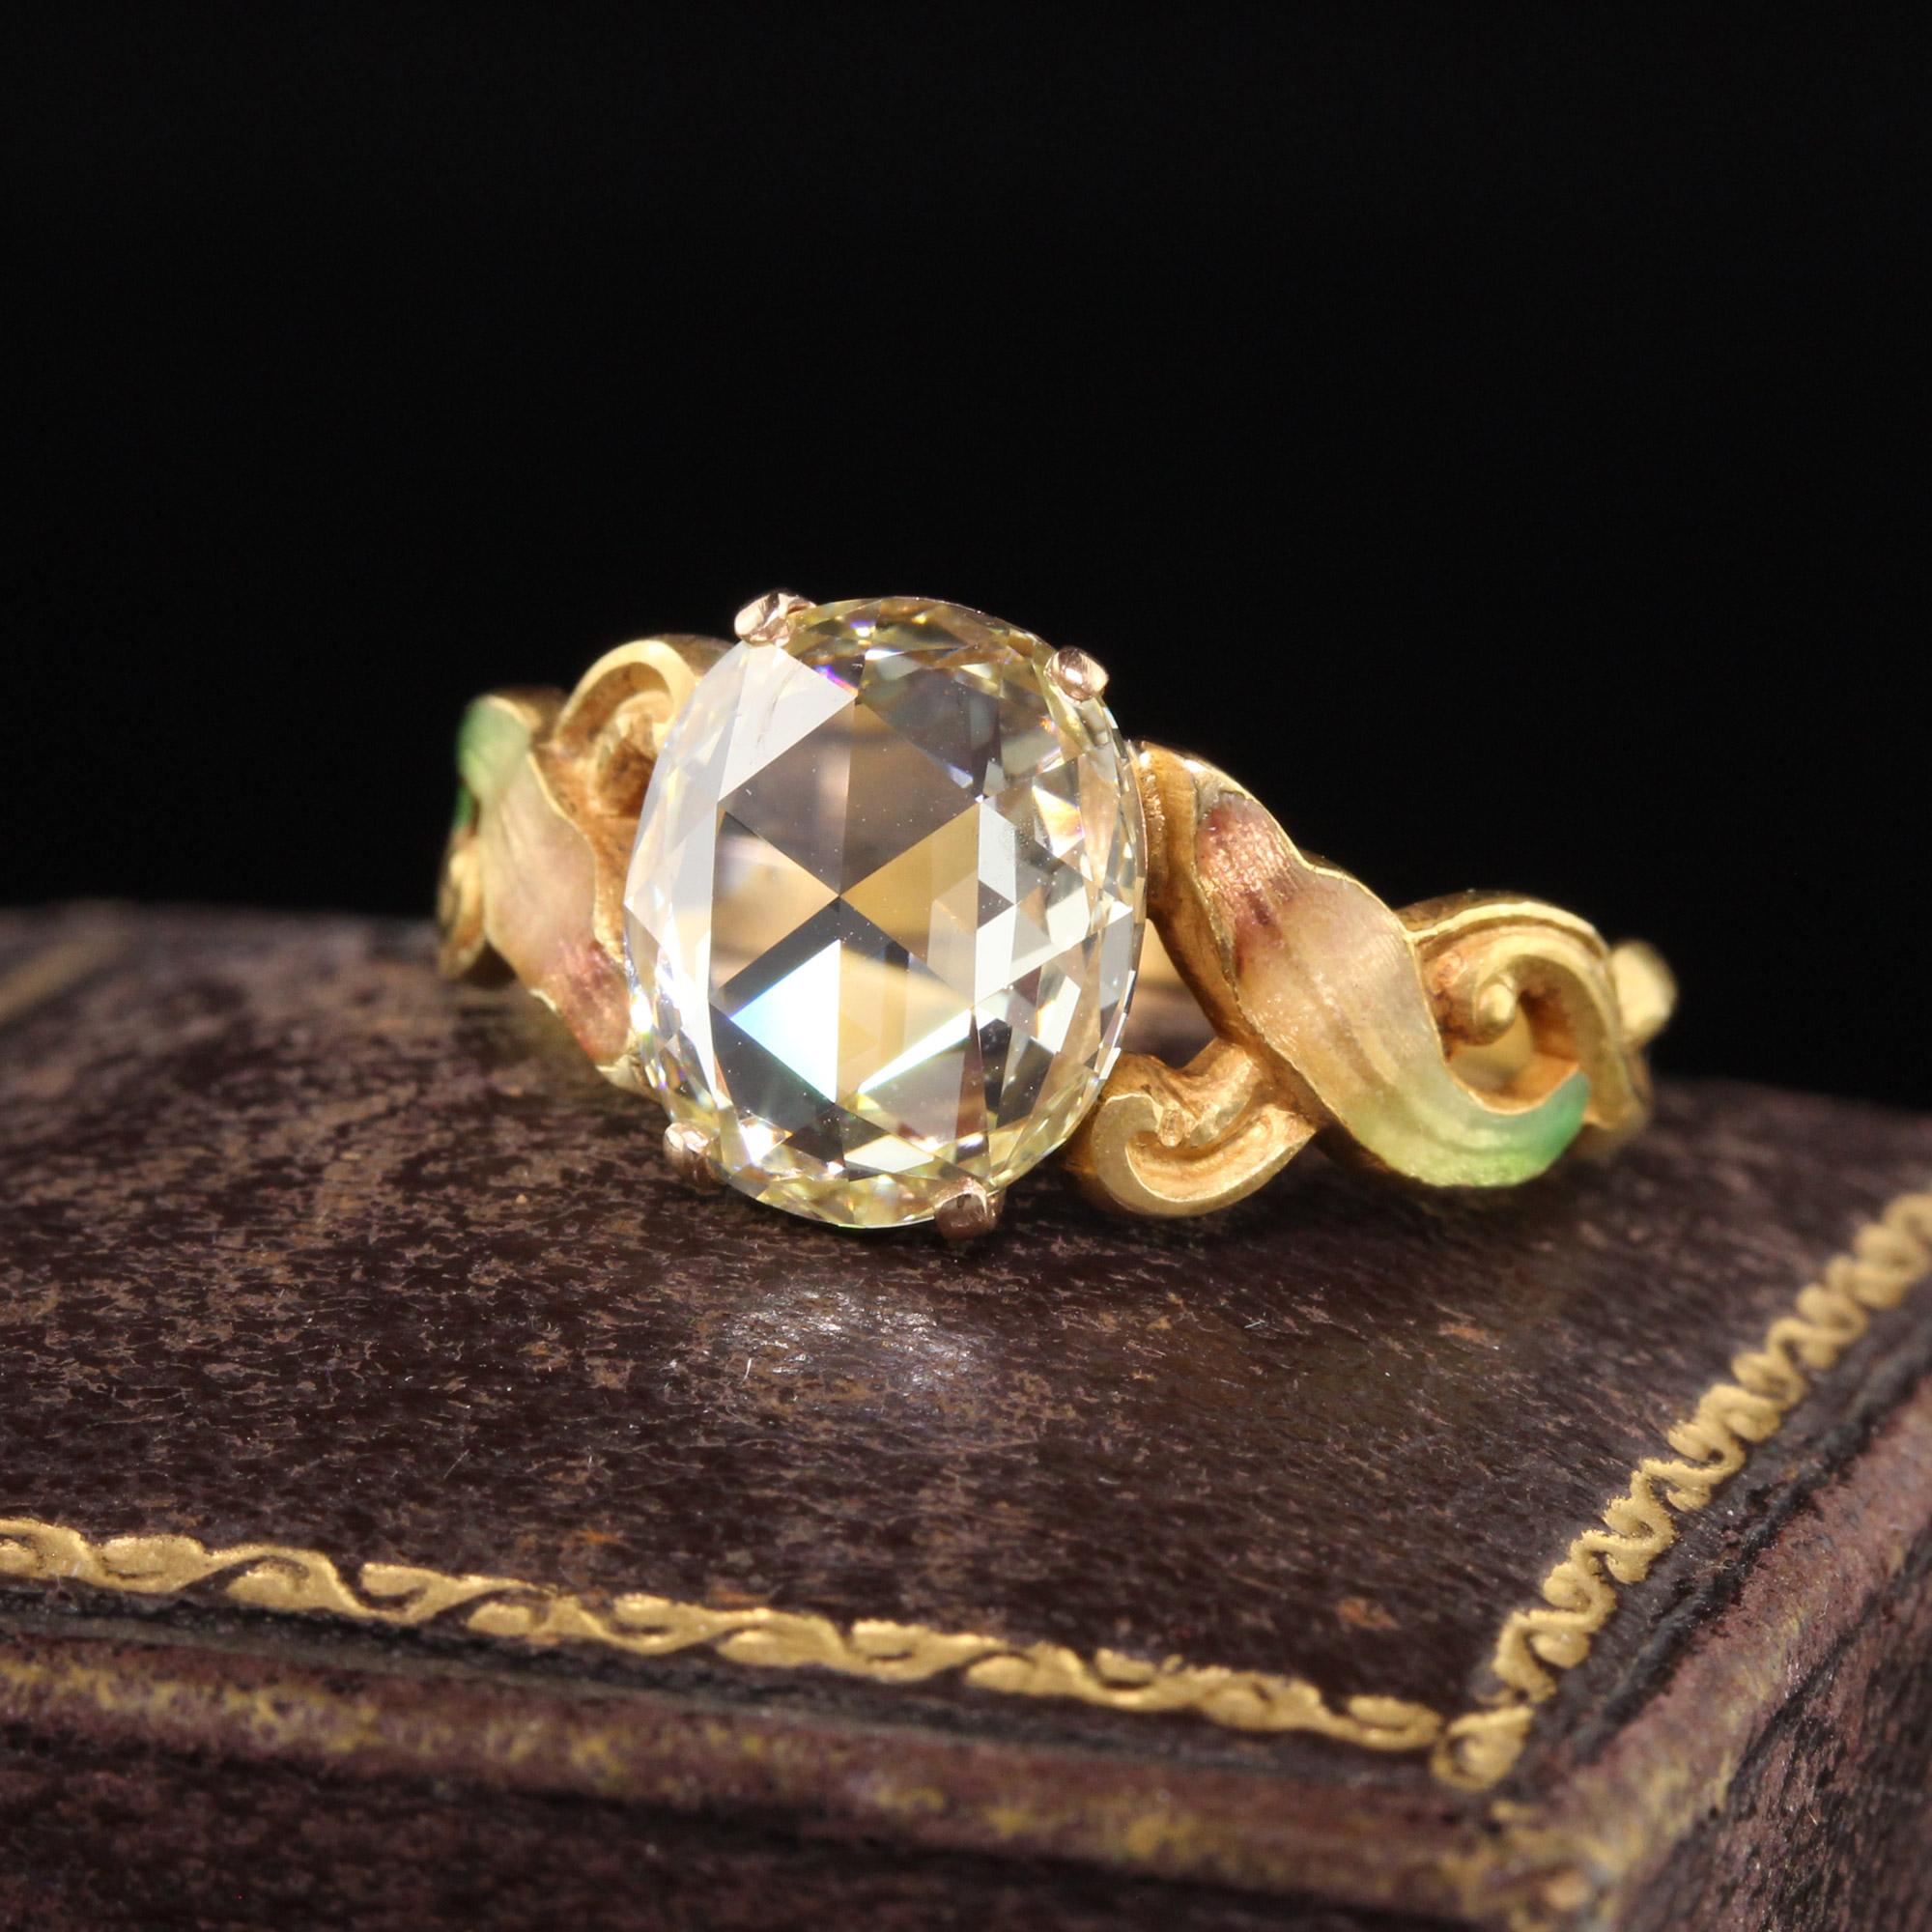 Beautiful Antique Art Nouveau 18K Yellow Gold Domed Rose Cut Diamond Engagement Ring. This incredible Art Nouveau engagement ring is crafted in 18K yellow gold with enamel on the sides. The center is a GIA certified 2.11 ct domed rose cut diamond